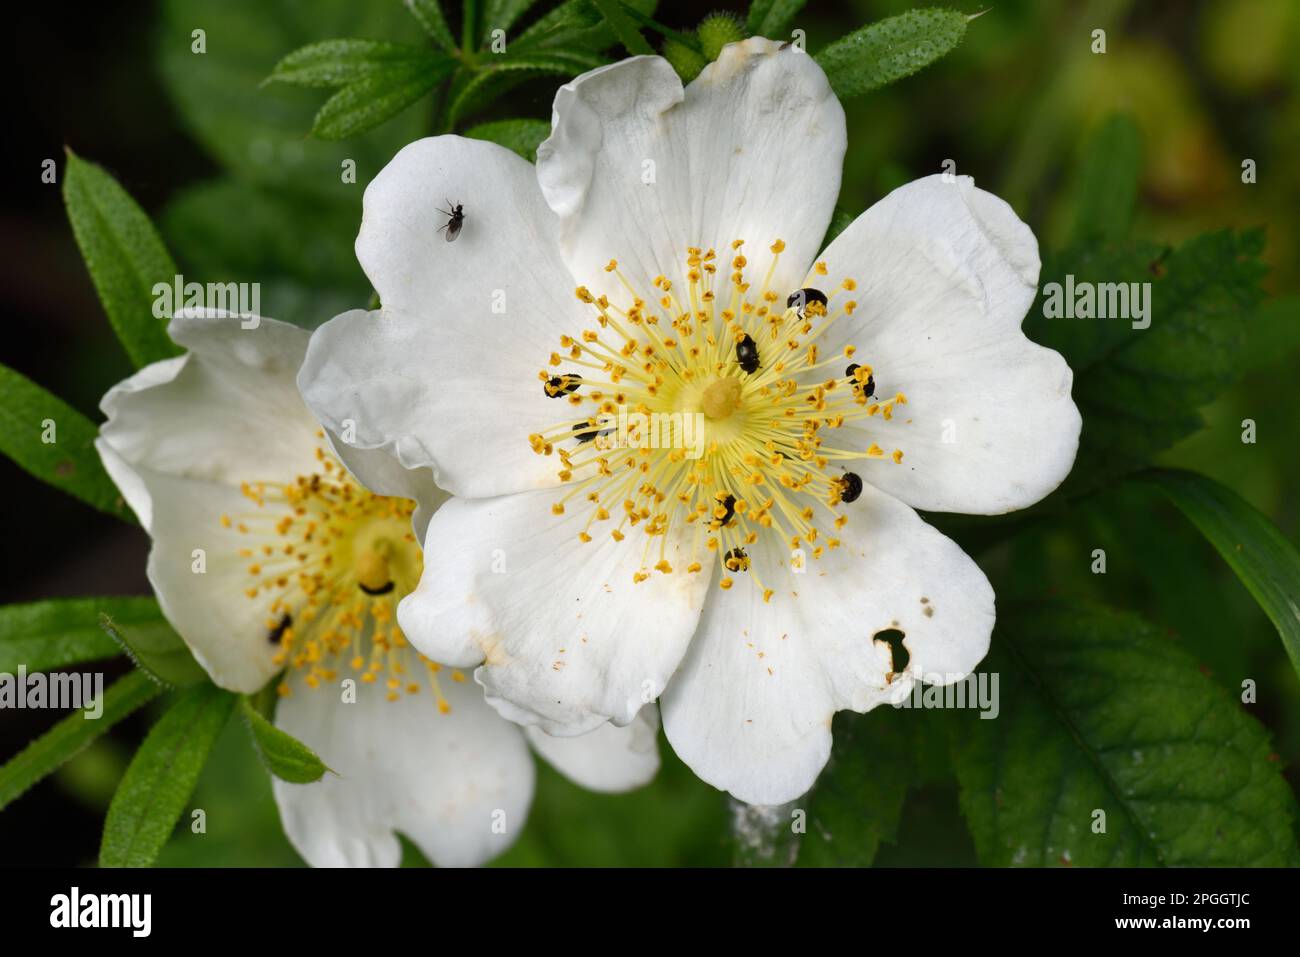 Field rose, Rosa arvensis, white flowers on a wild climbing rose plant with pollen beetle (Meligethes aeneus), Berkshire, England, United Kingdom Stock Photo